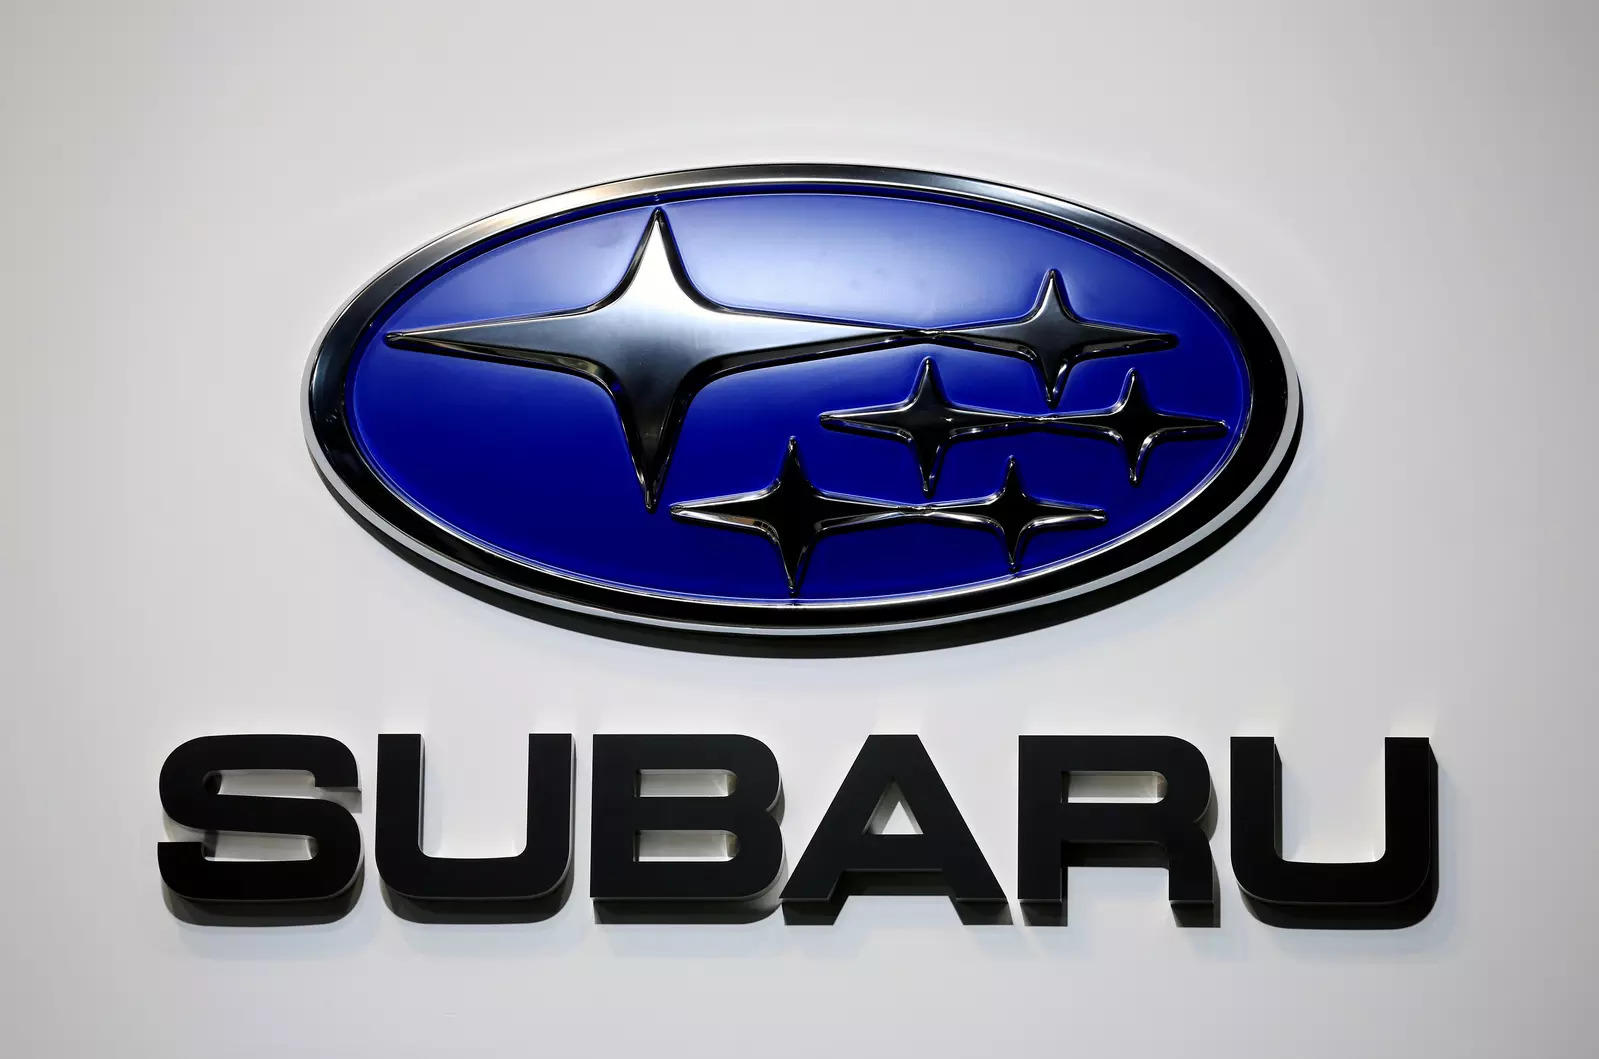 Subaru plans to reduce production by 48,000 vehicles this year due to chip shortage